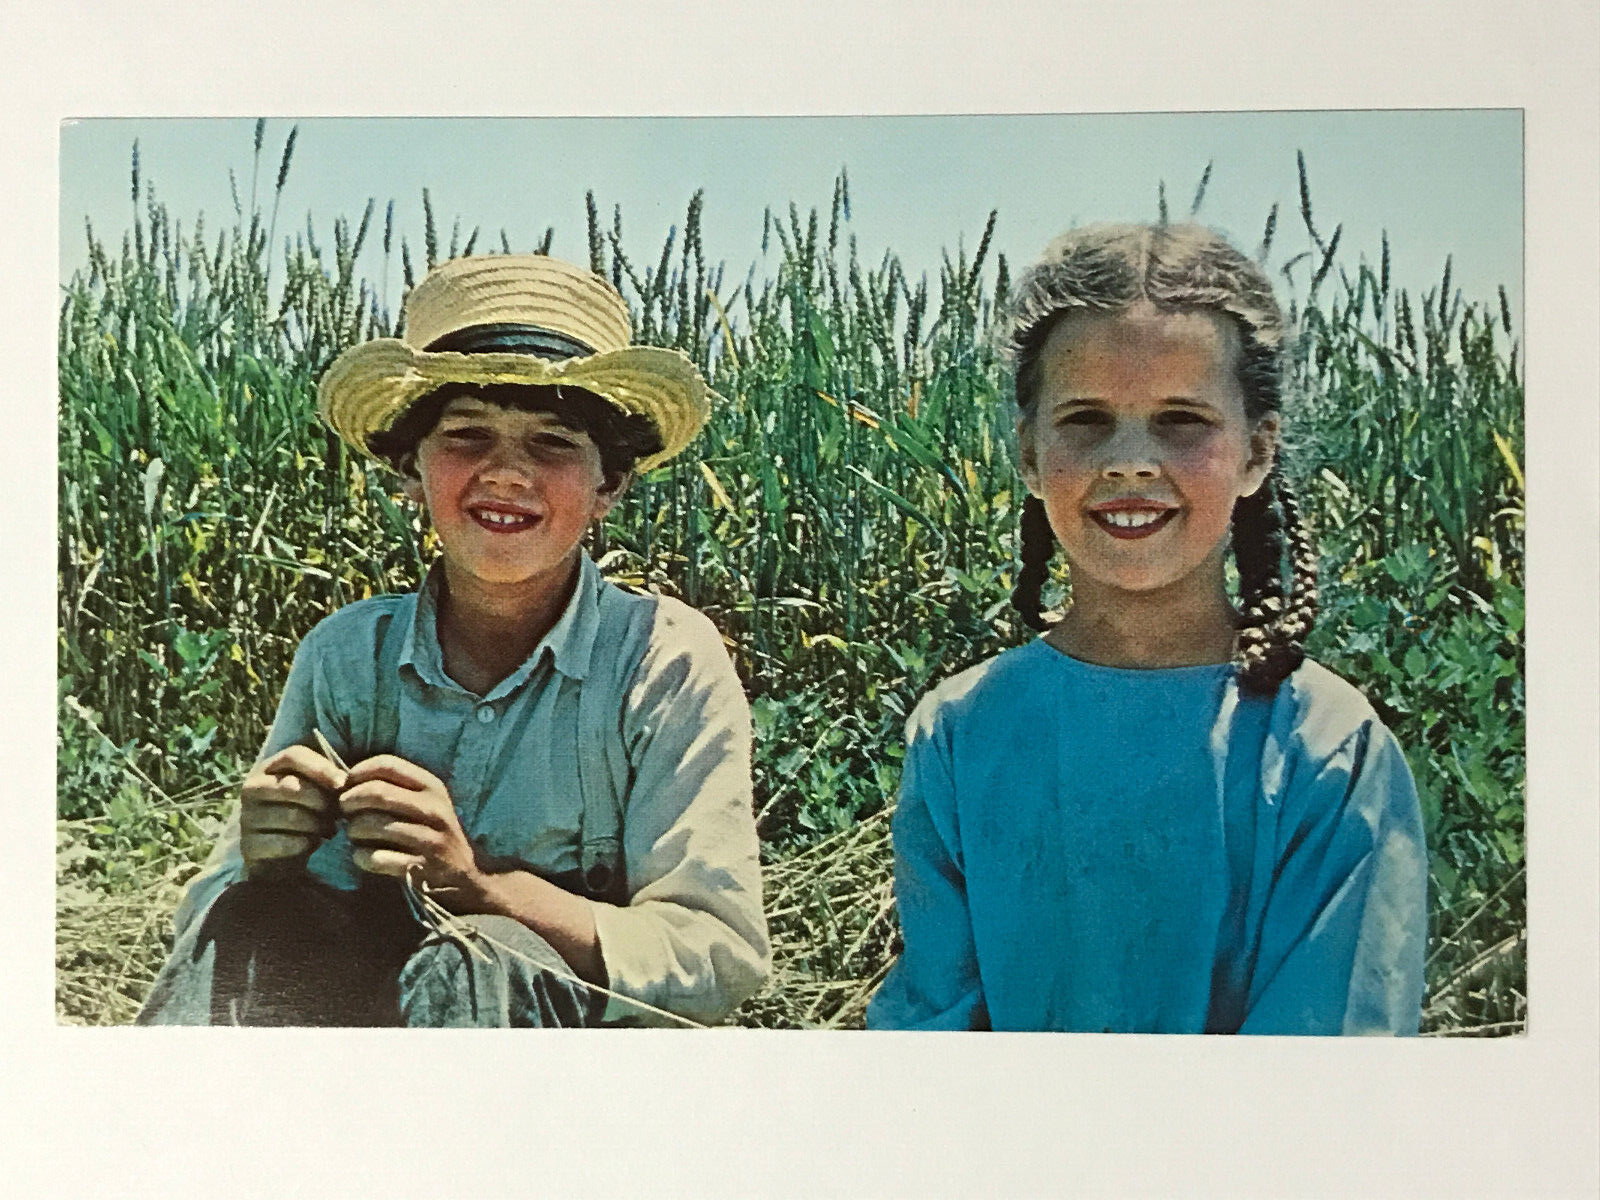 Postcard Amish Children Brother Sister Posing In Field Prior To Harvest c1960s